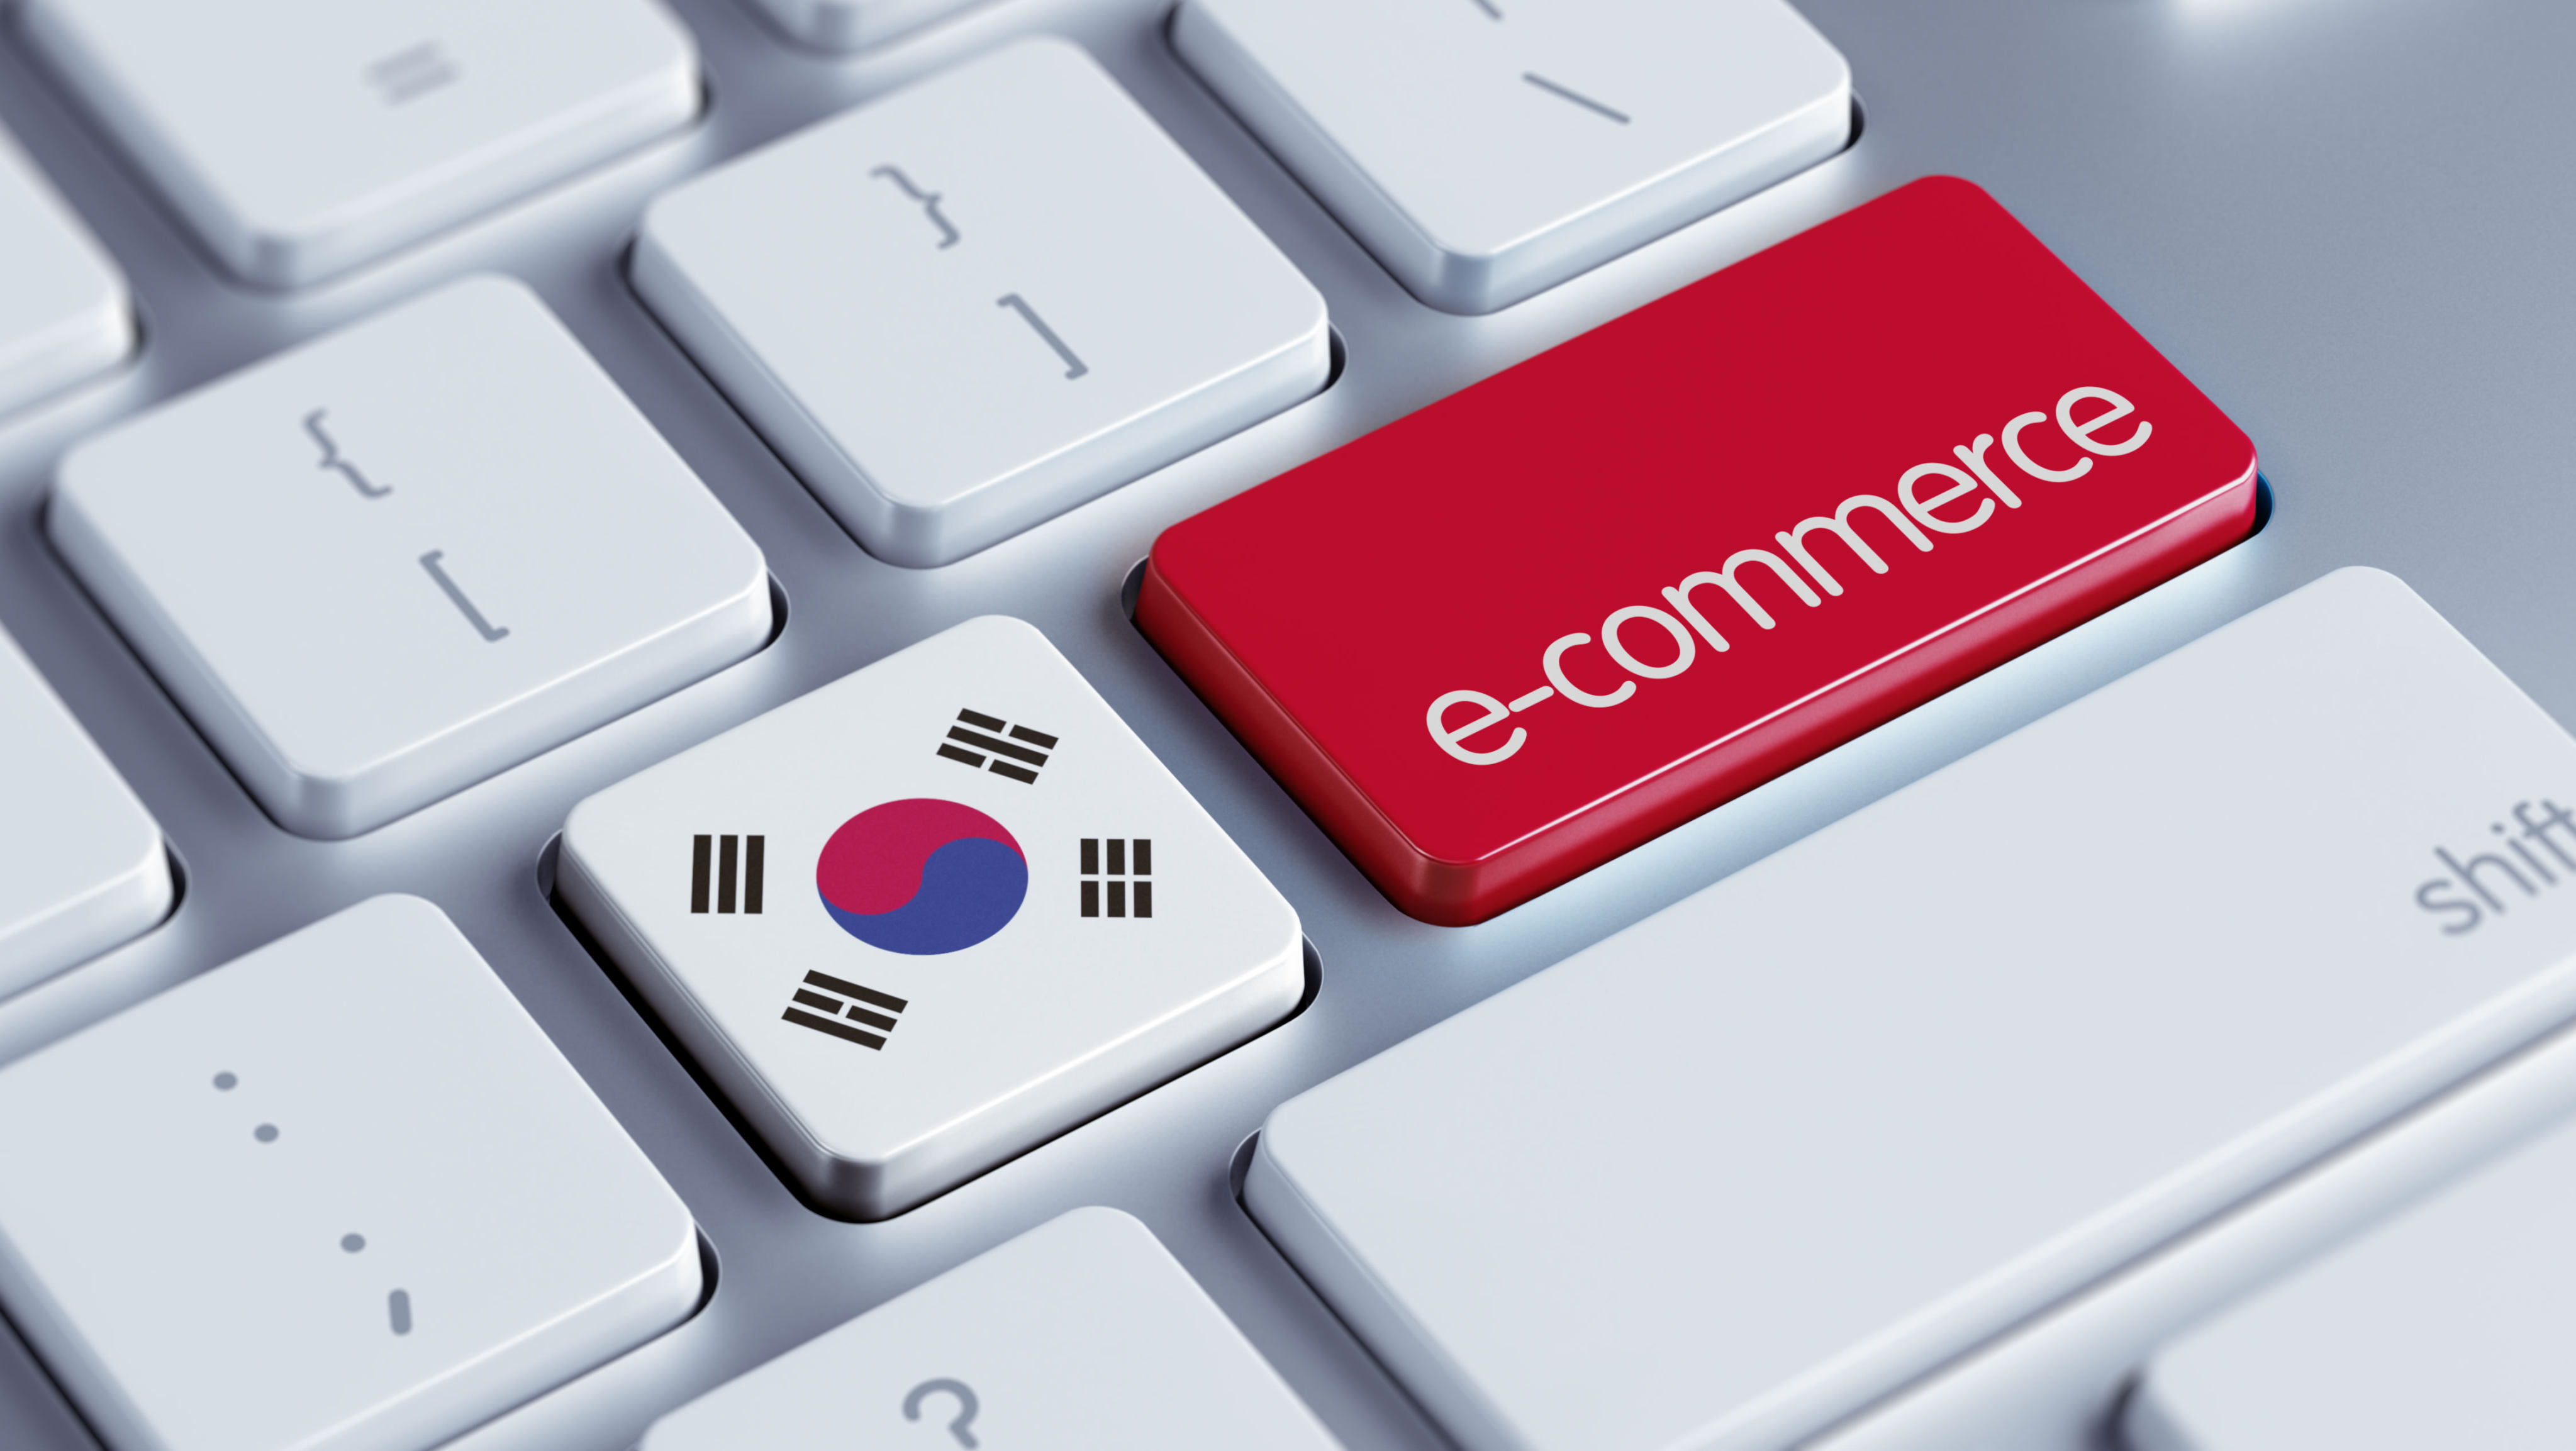 South Korea was ranked as the world’s fourth-largest e-commerce market with a projected revenue of US$139.8 billion in 2023, according to a report from online database ECDB. Photo: Shutterstock